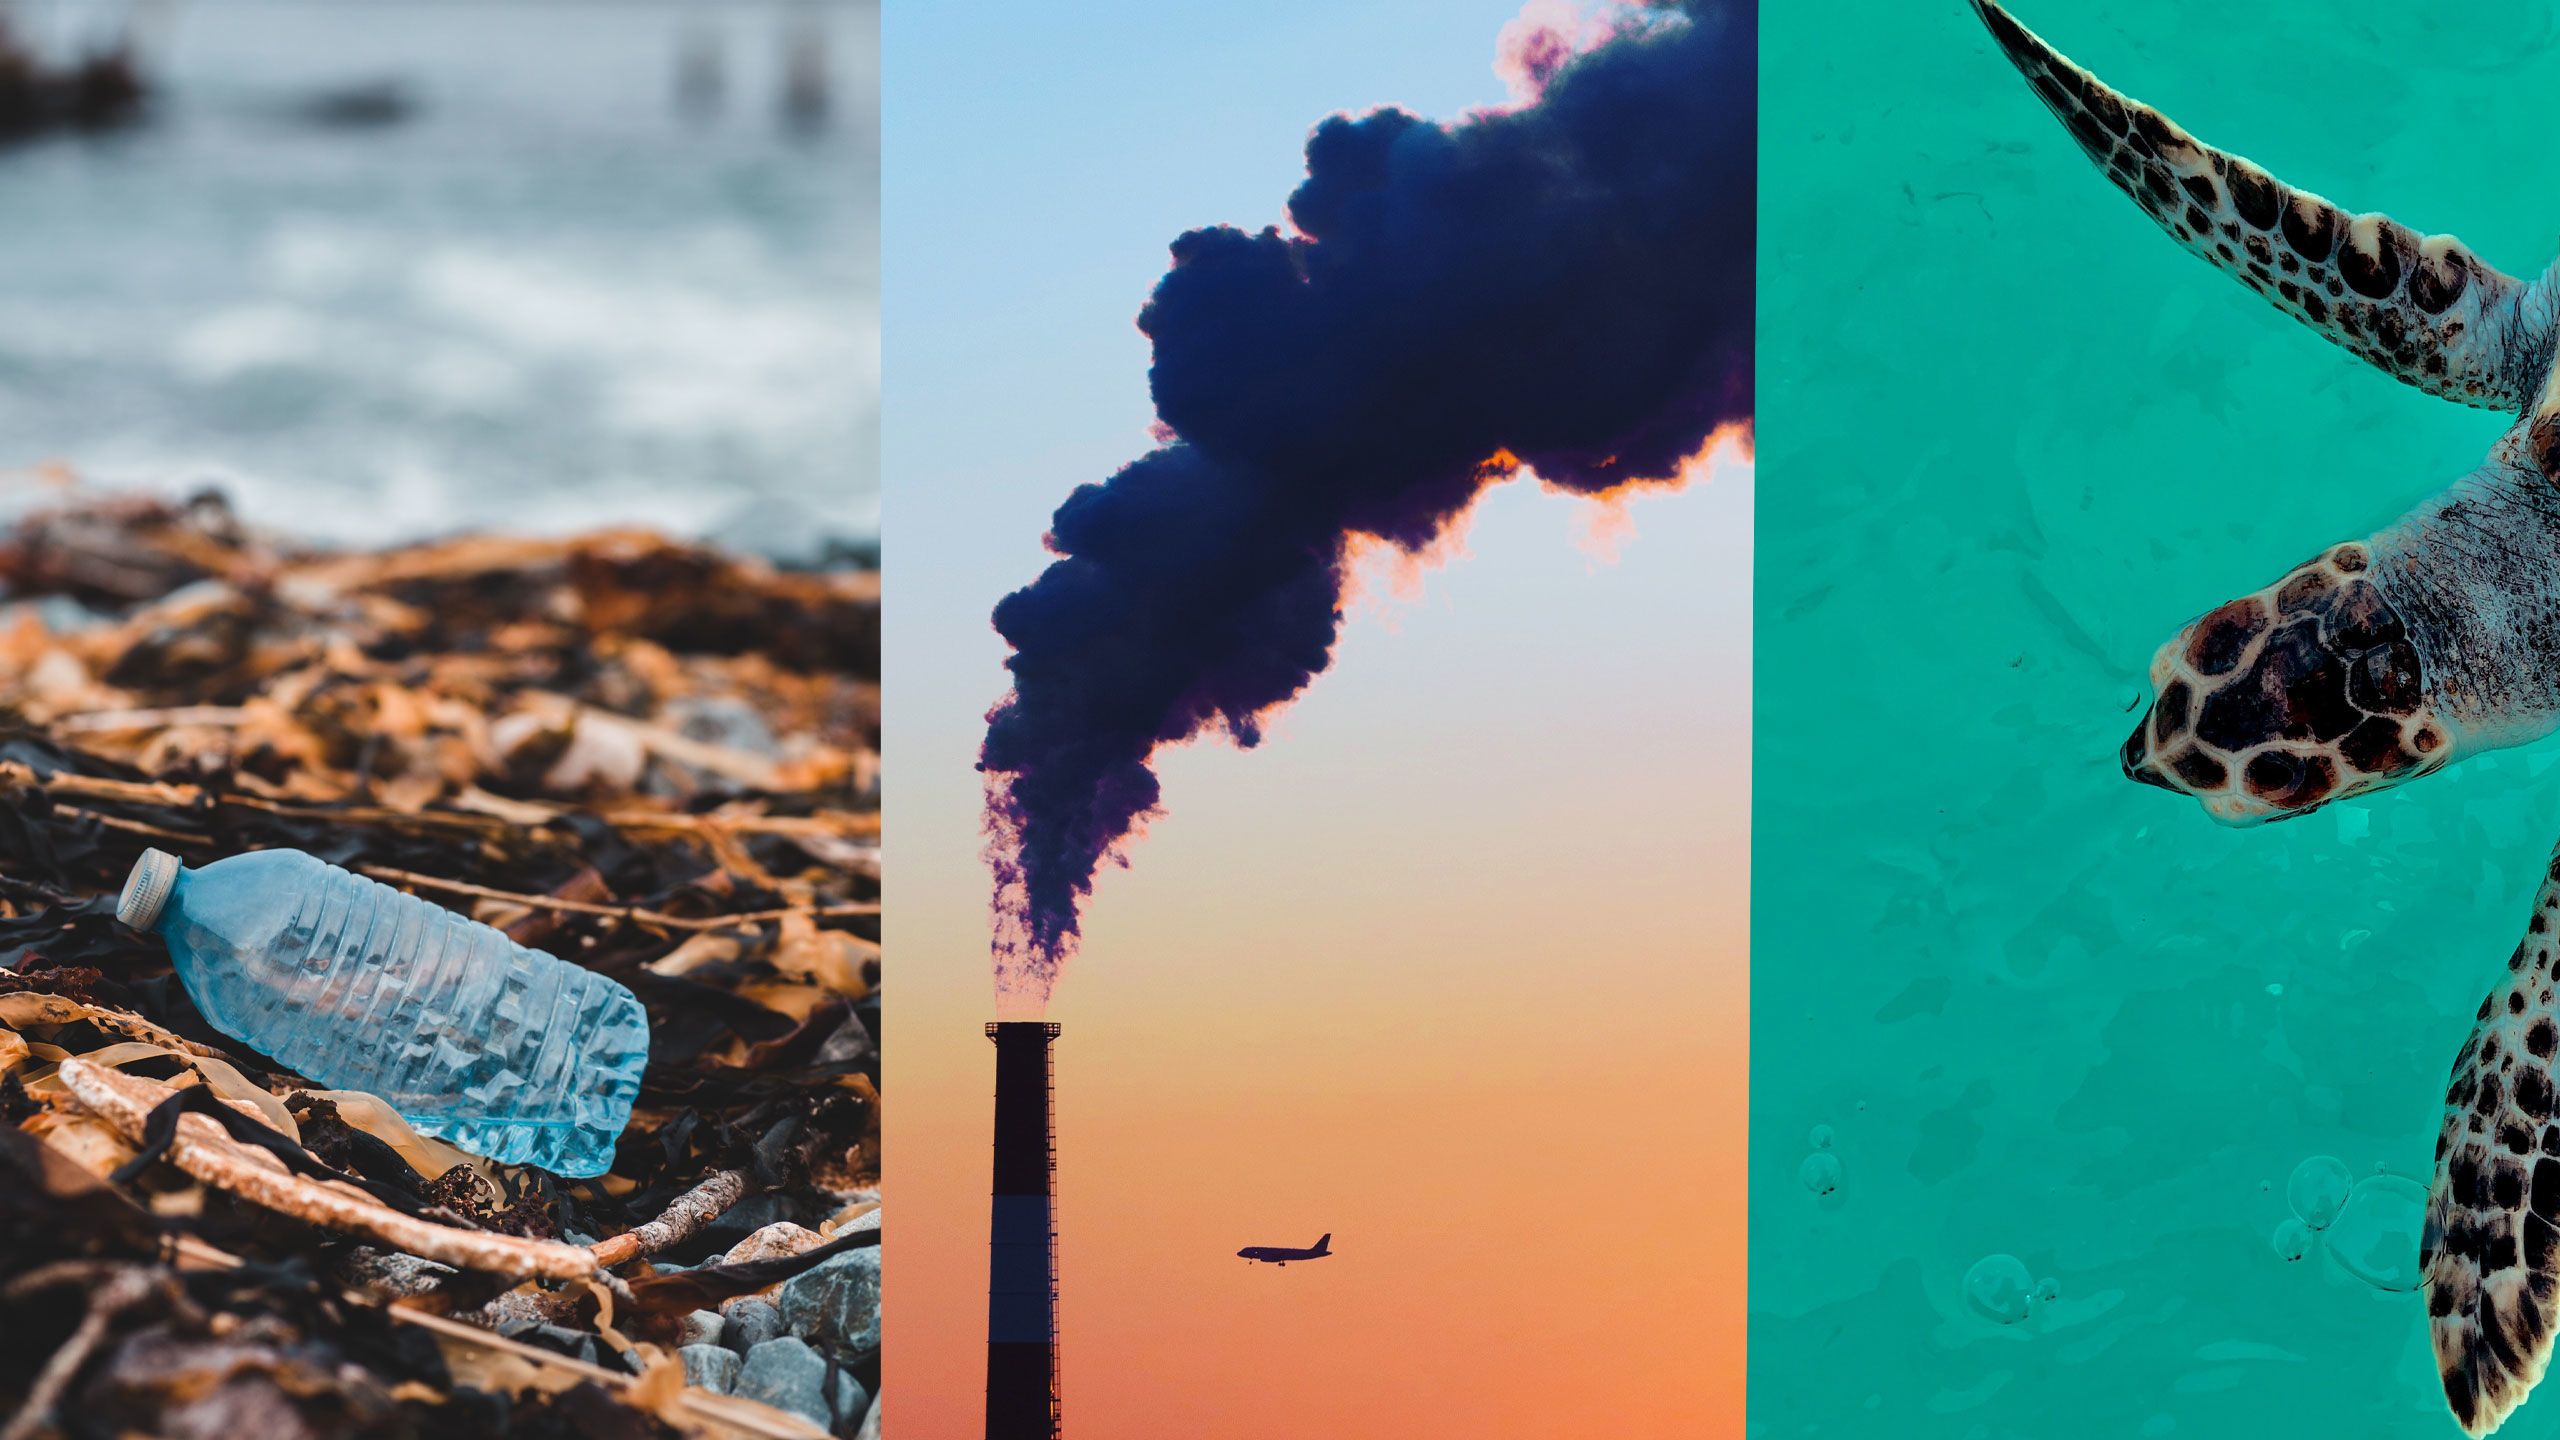 Three images alongside each other. The first is a plastic bottle on a beach, the second is a funnel with smoke coming out, and the third is a turtle in the ocean.